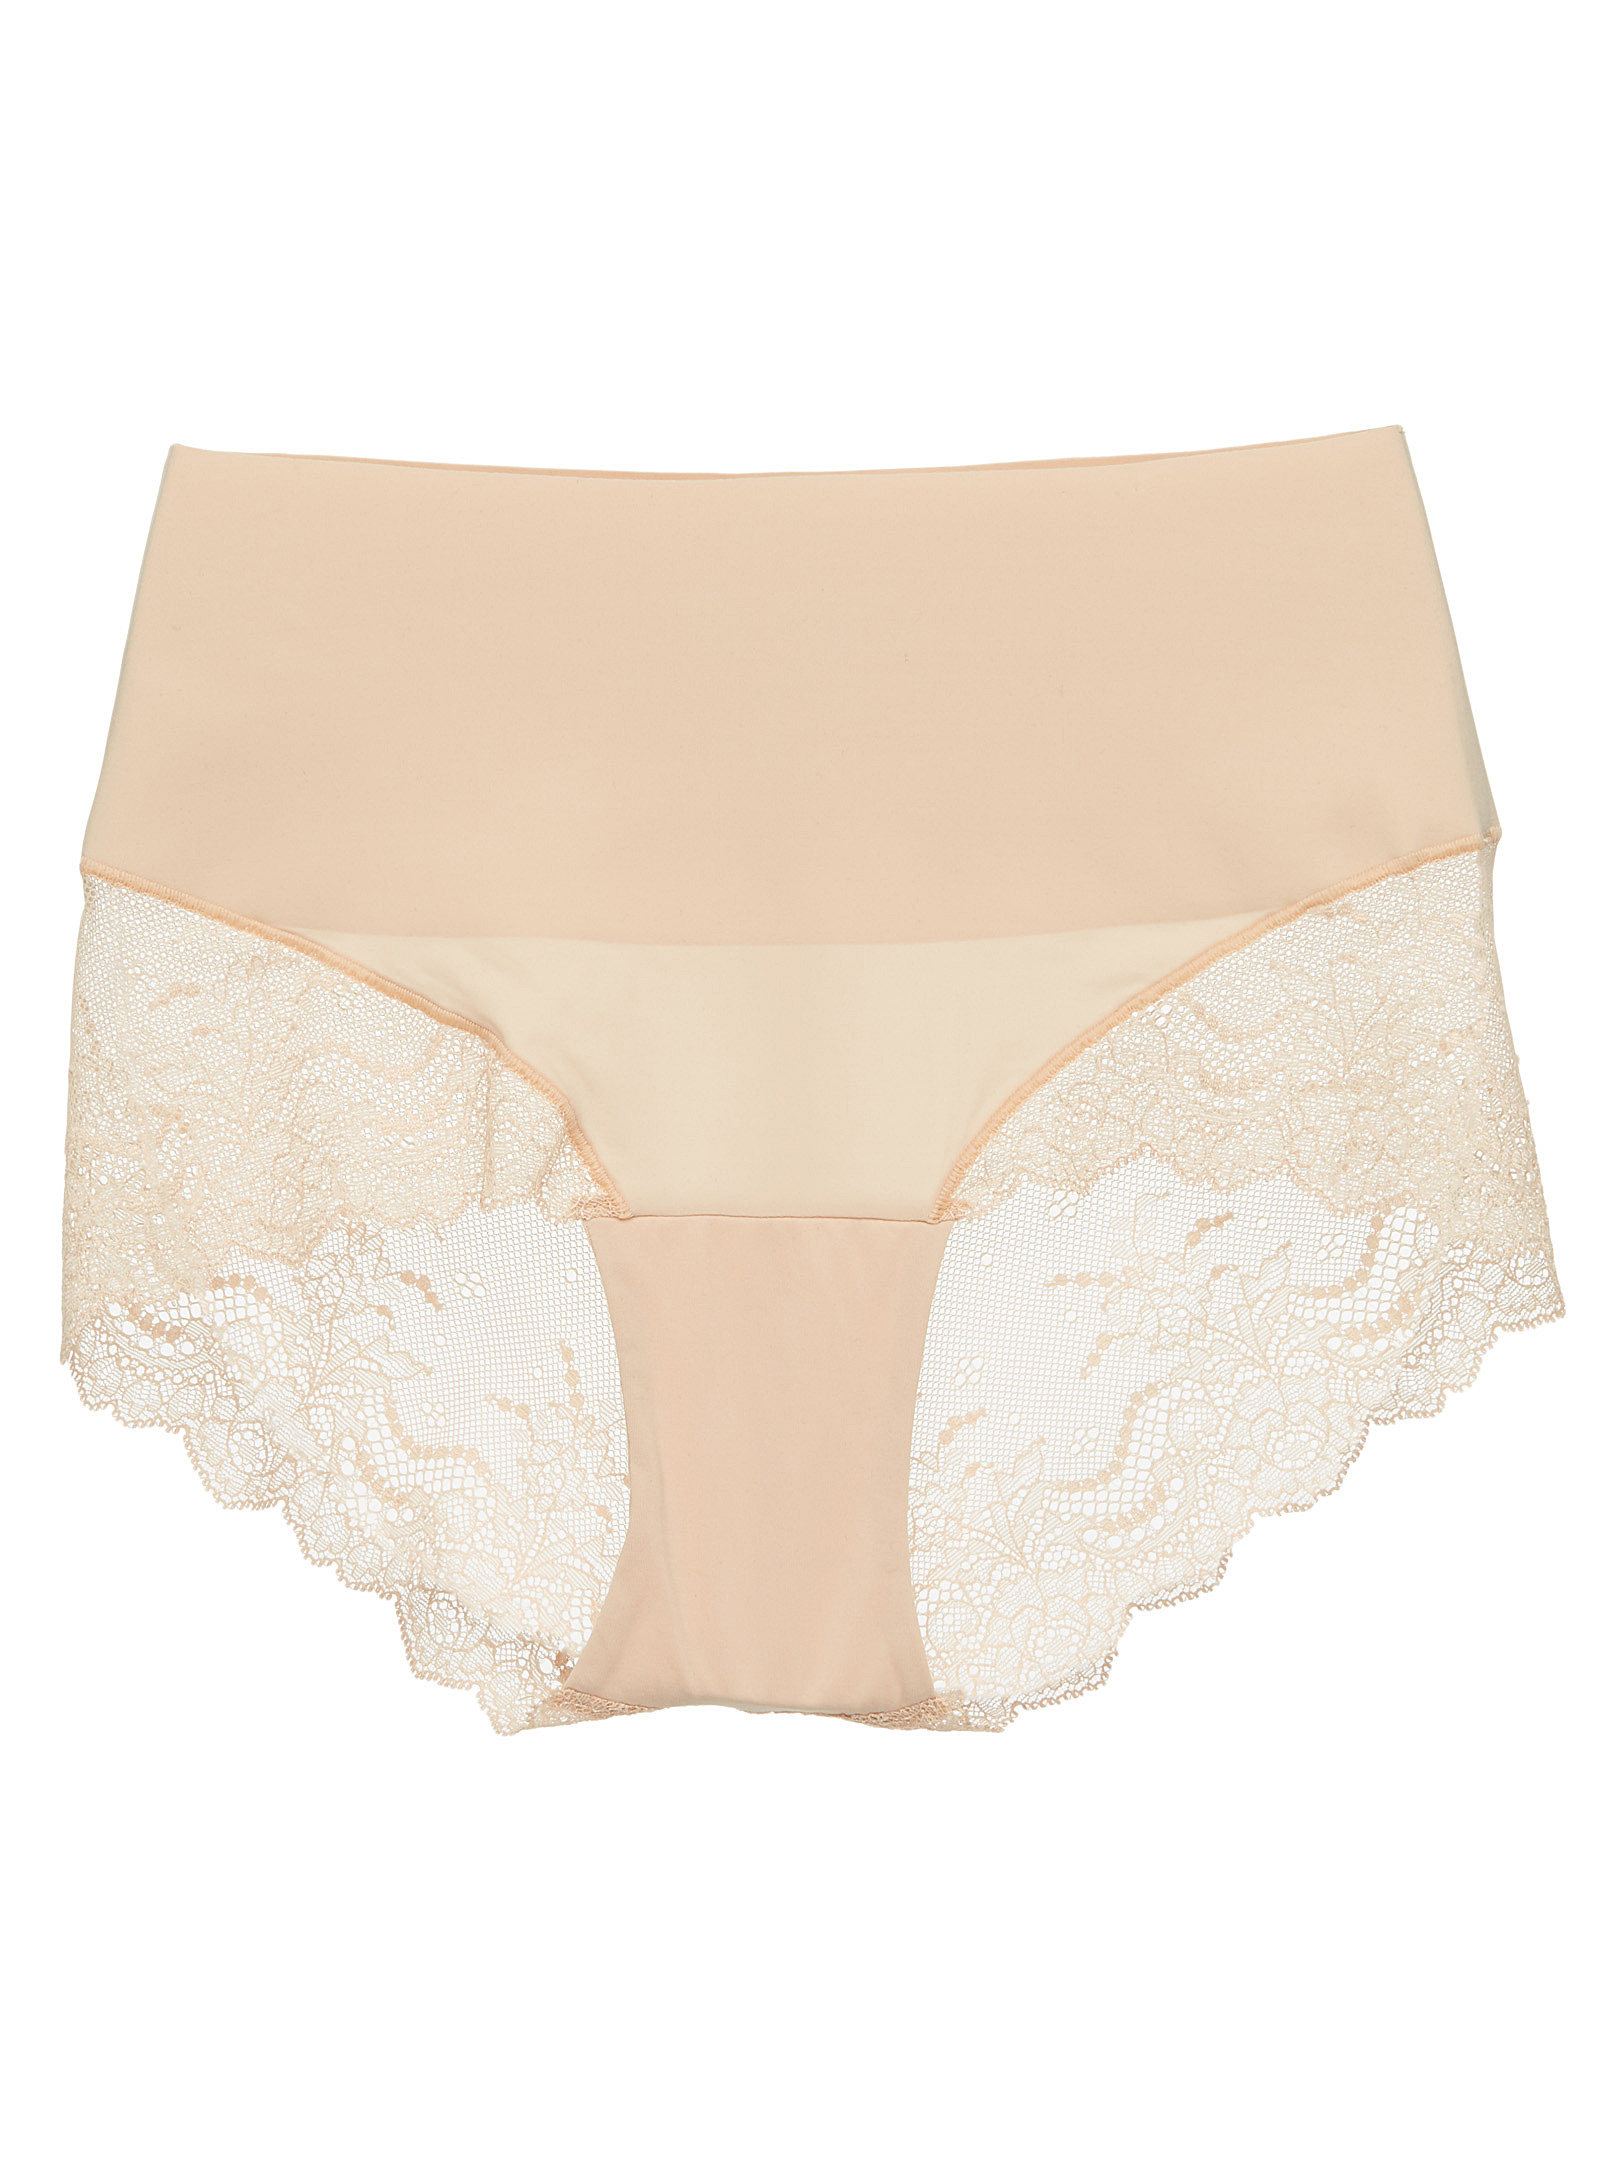 Spanx Undie-tectable Lace Support Bikini Panty In Tan